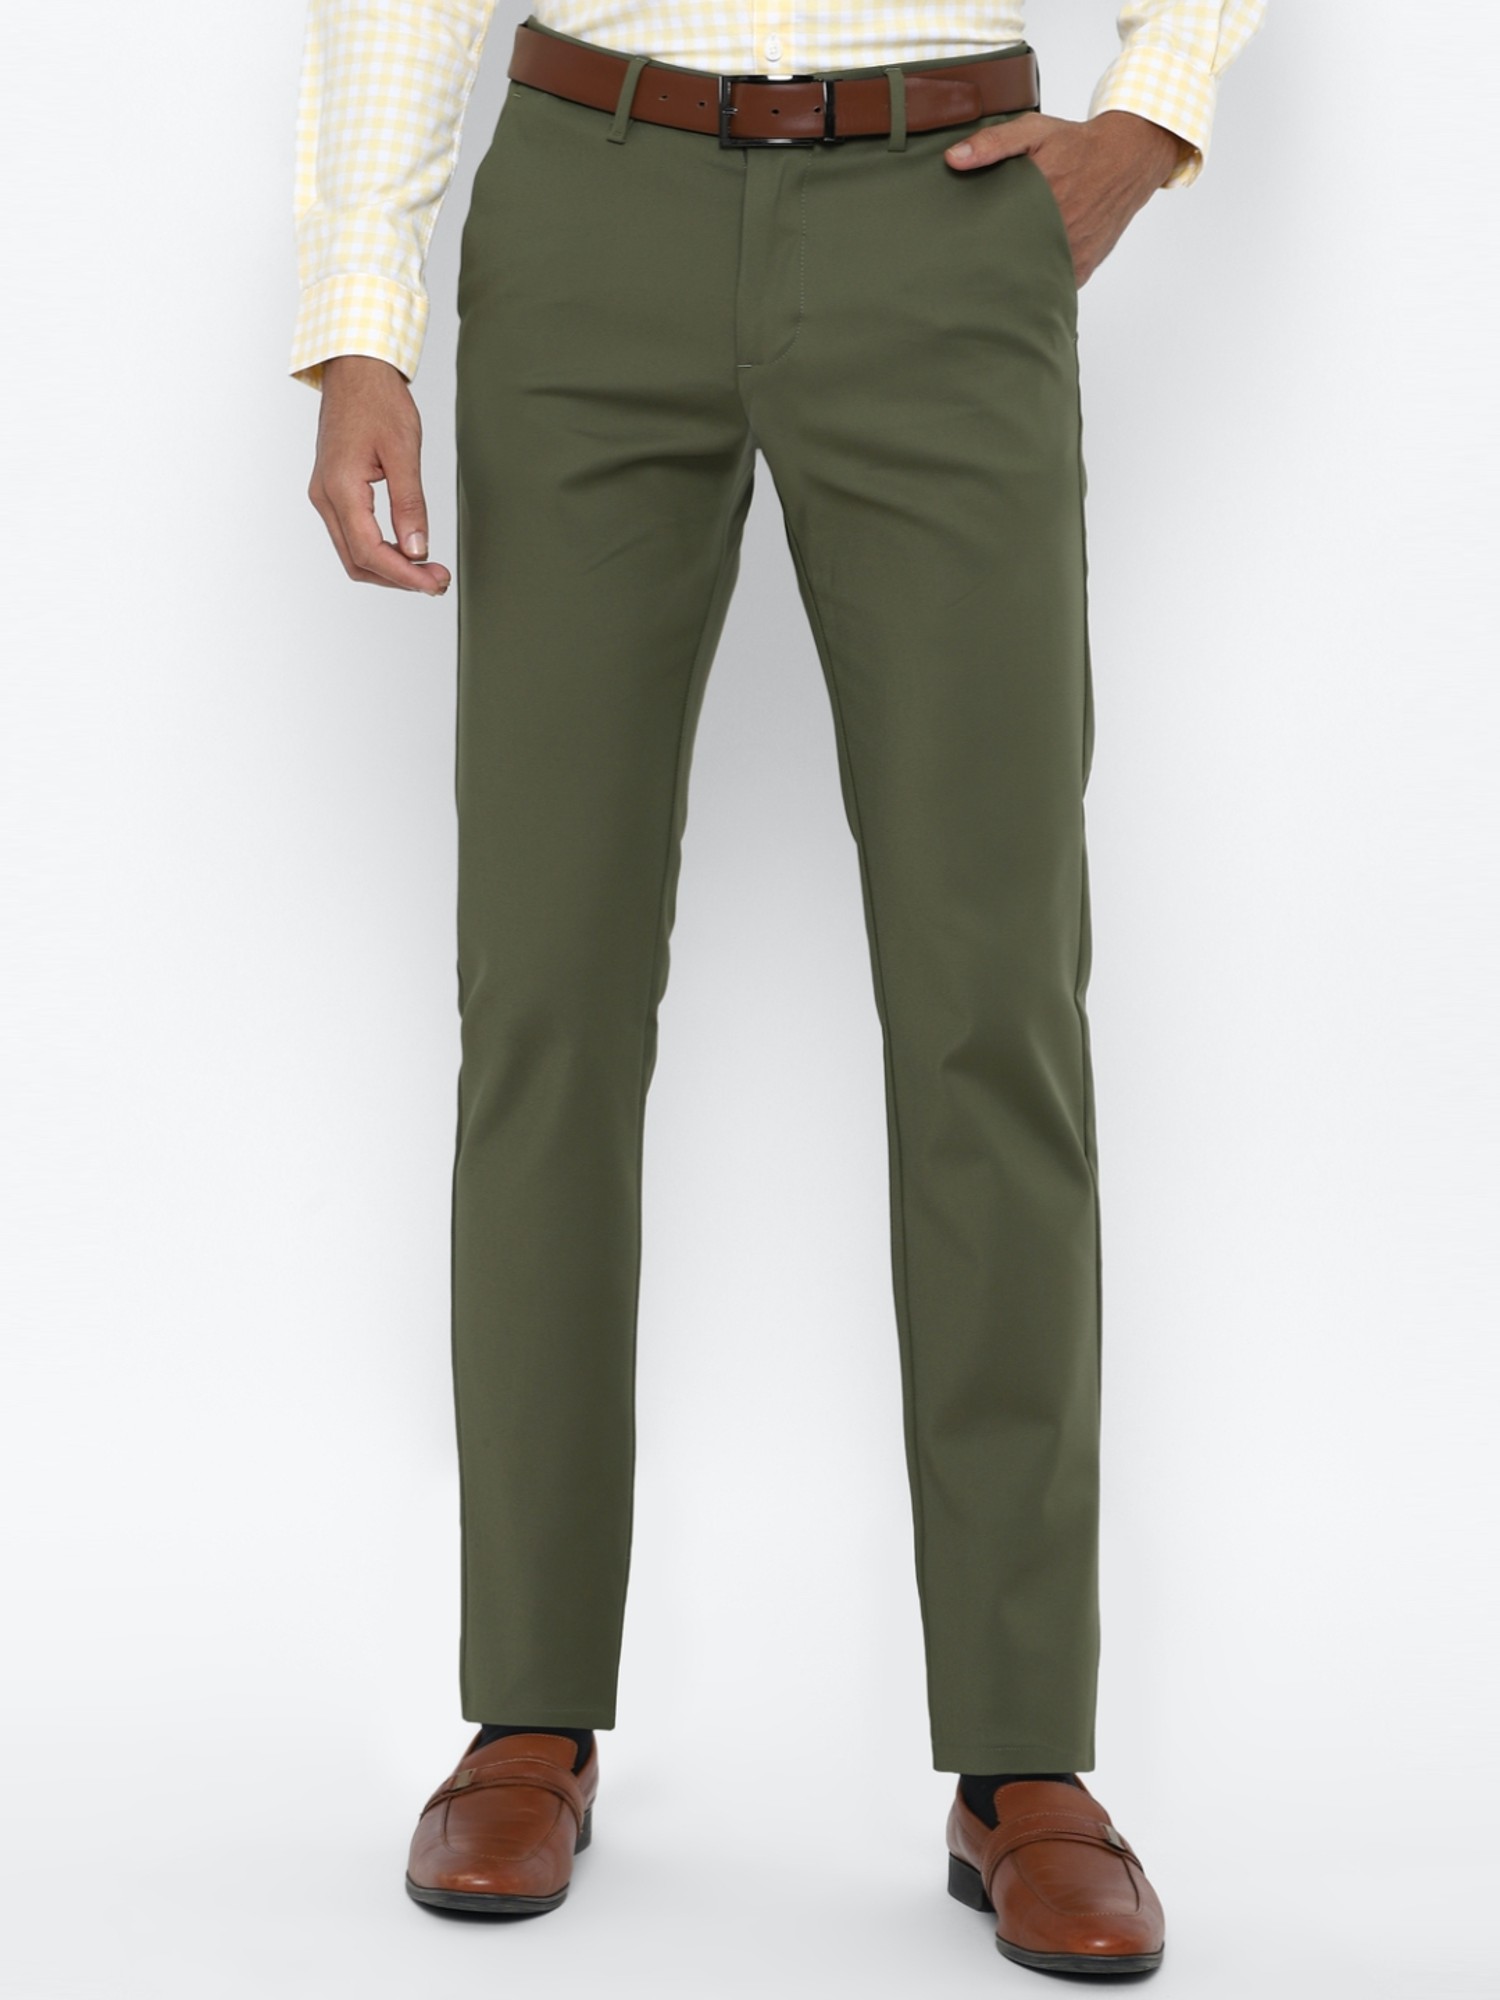 Buy ALLEN SOLLY Green Cotton Blend Super Slim Fit Mens Trousers  Shoppers  Stop